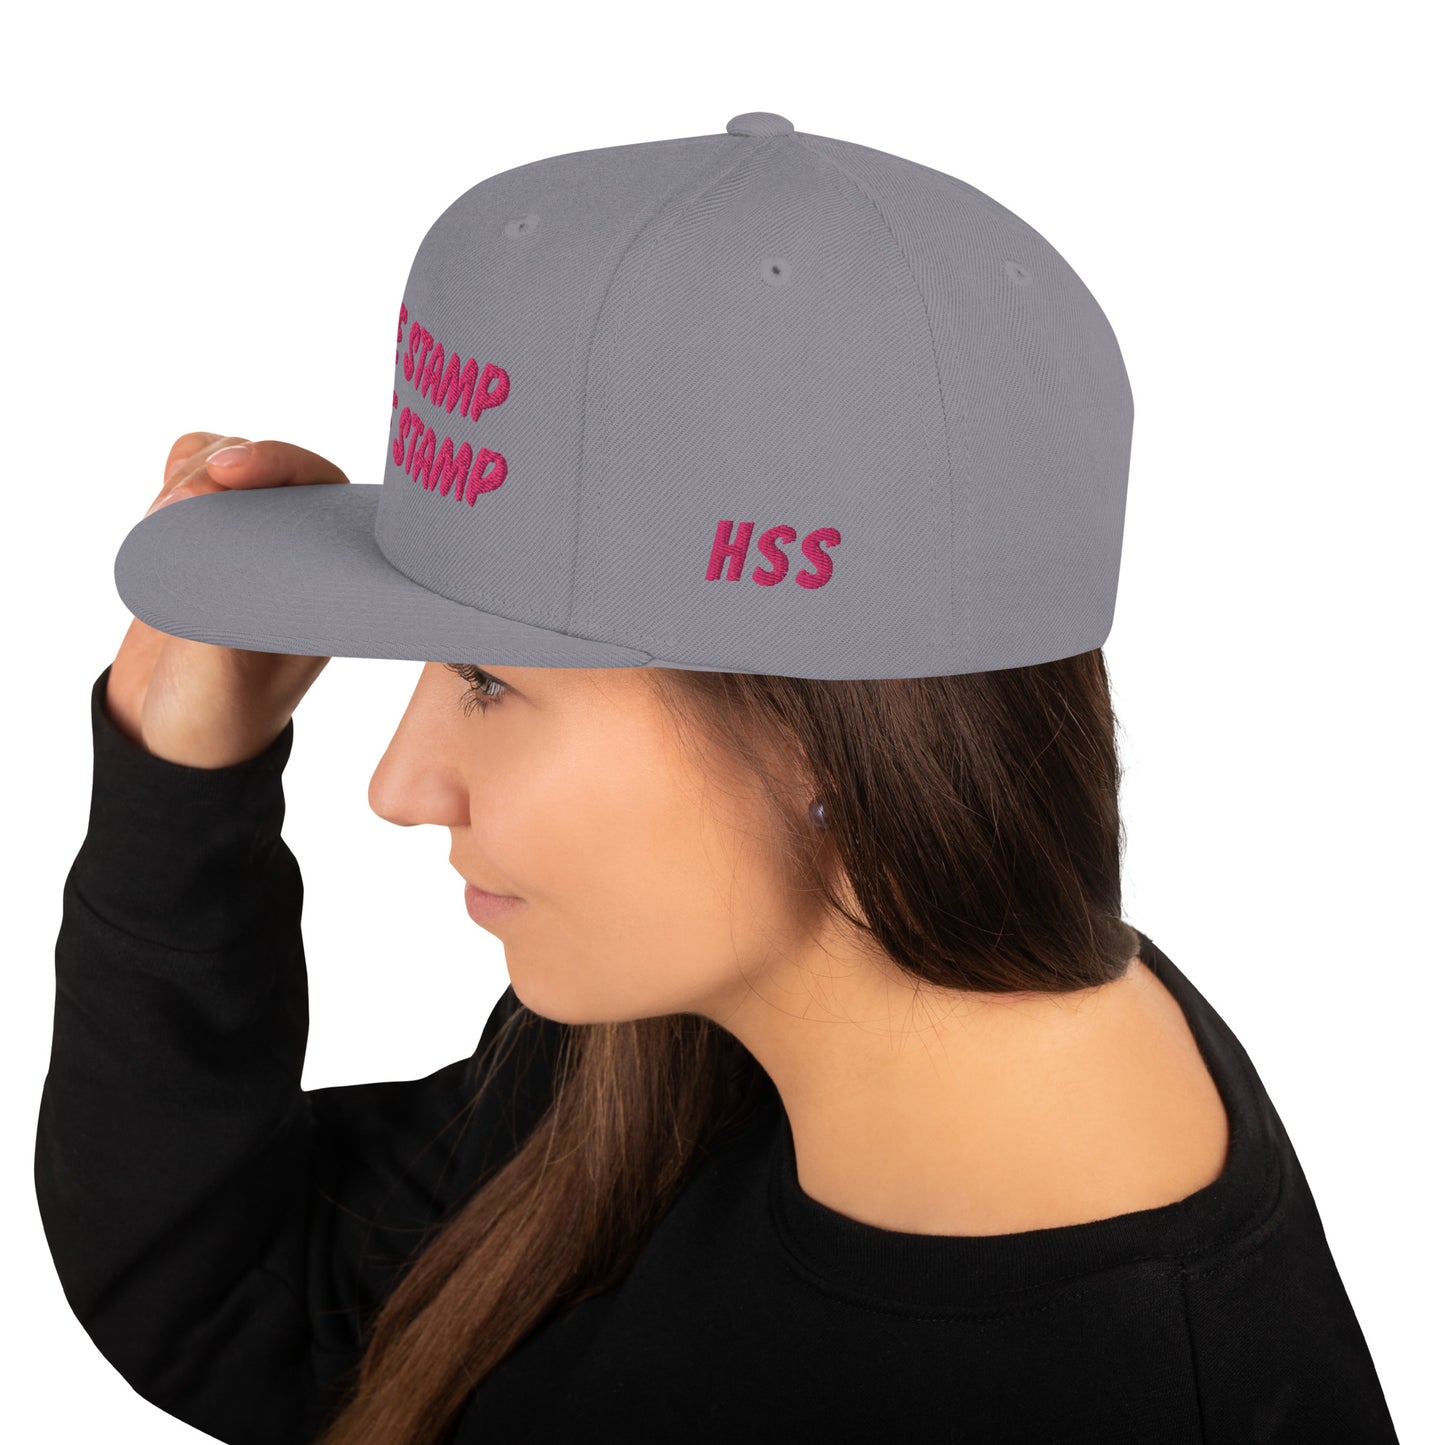 HSS - "Double Stamp a Triple Stamp" Snapback Hat